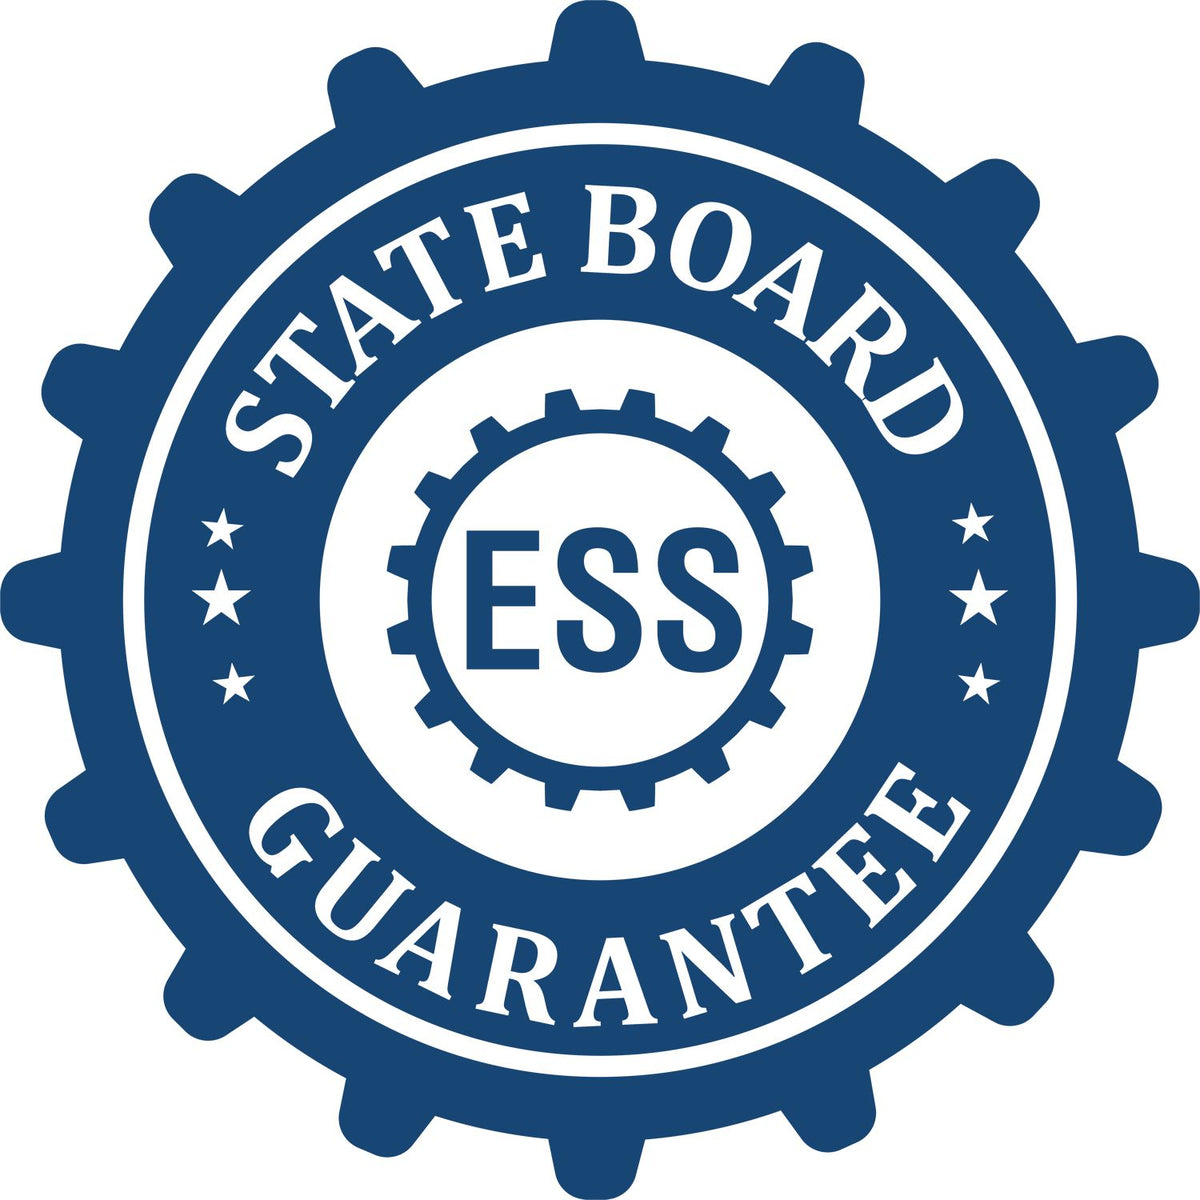 An emblem in a gear shape illustrating a state board guarantee for the Handheld Maryland Professional Geologist Embosser